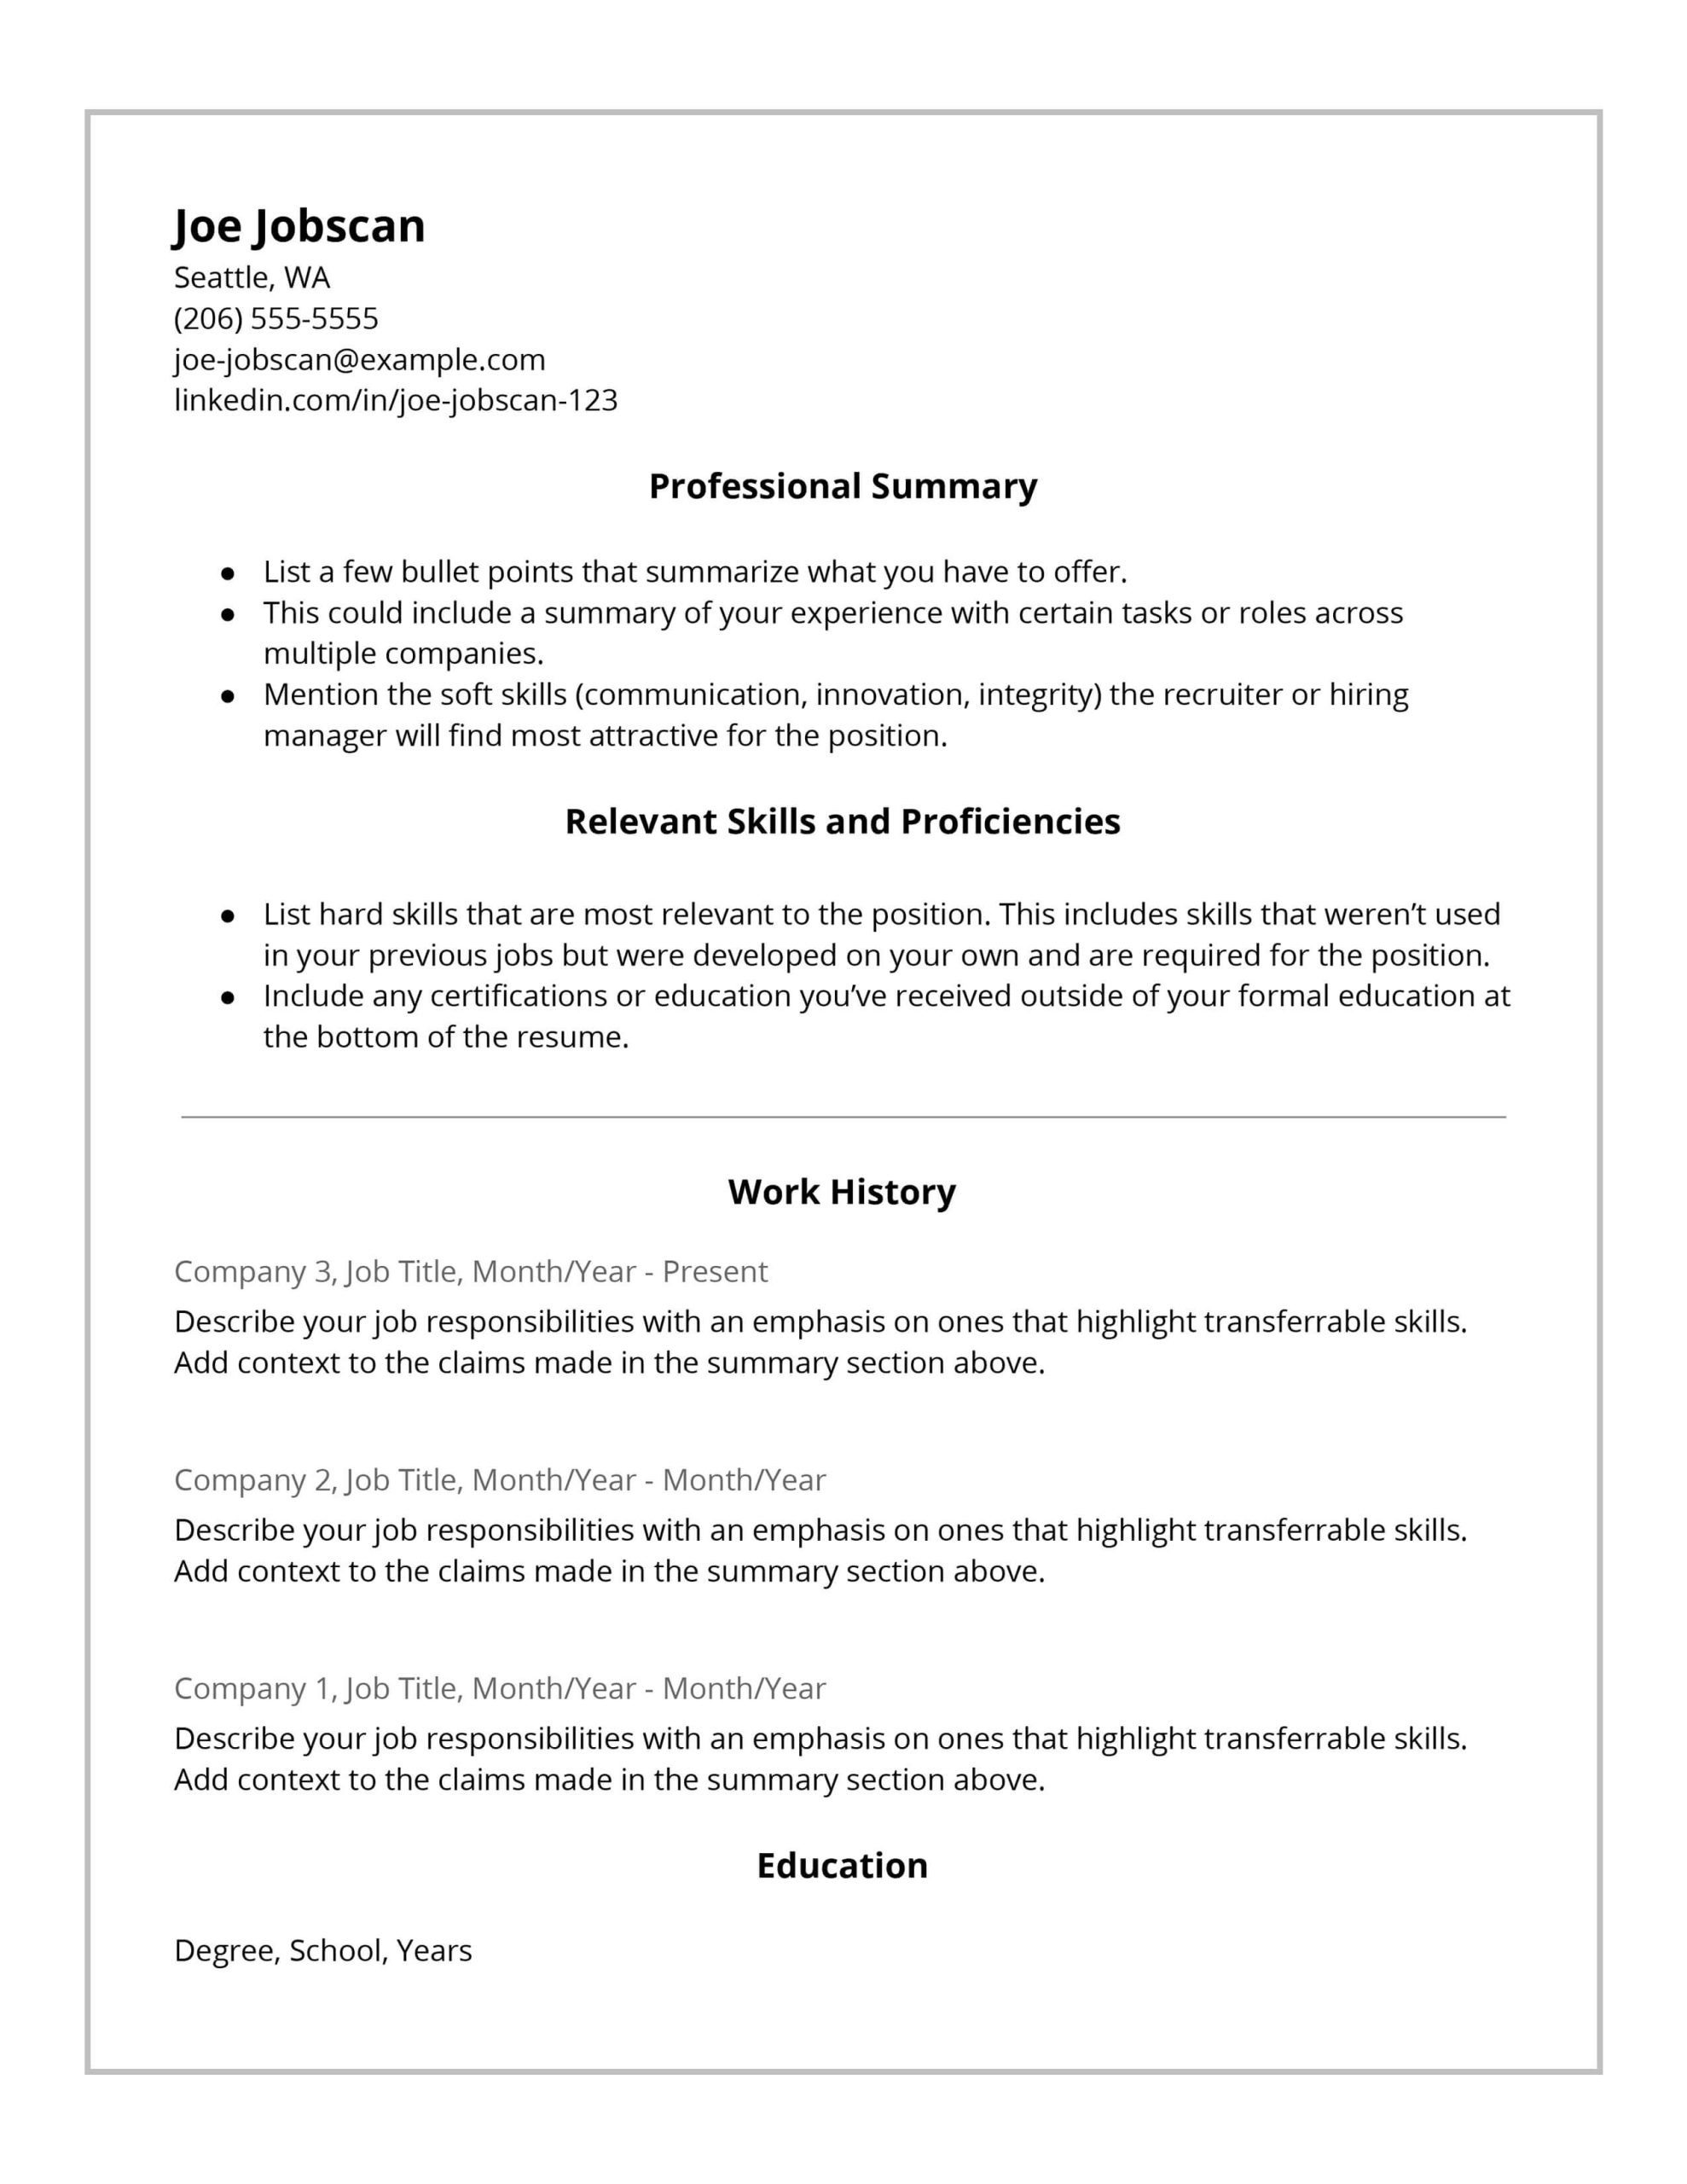 Functional Resume Samples with No Job Experience Recruiters Hate the Functional Resume formatâdo This Instead